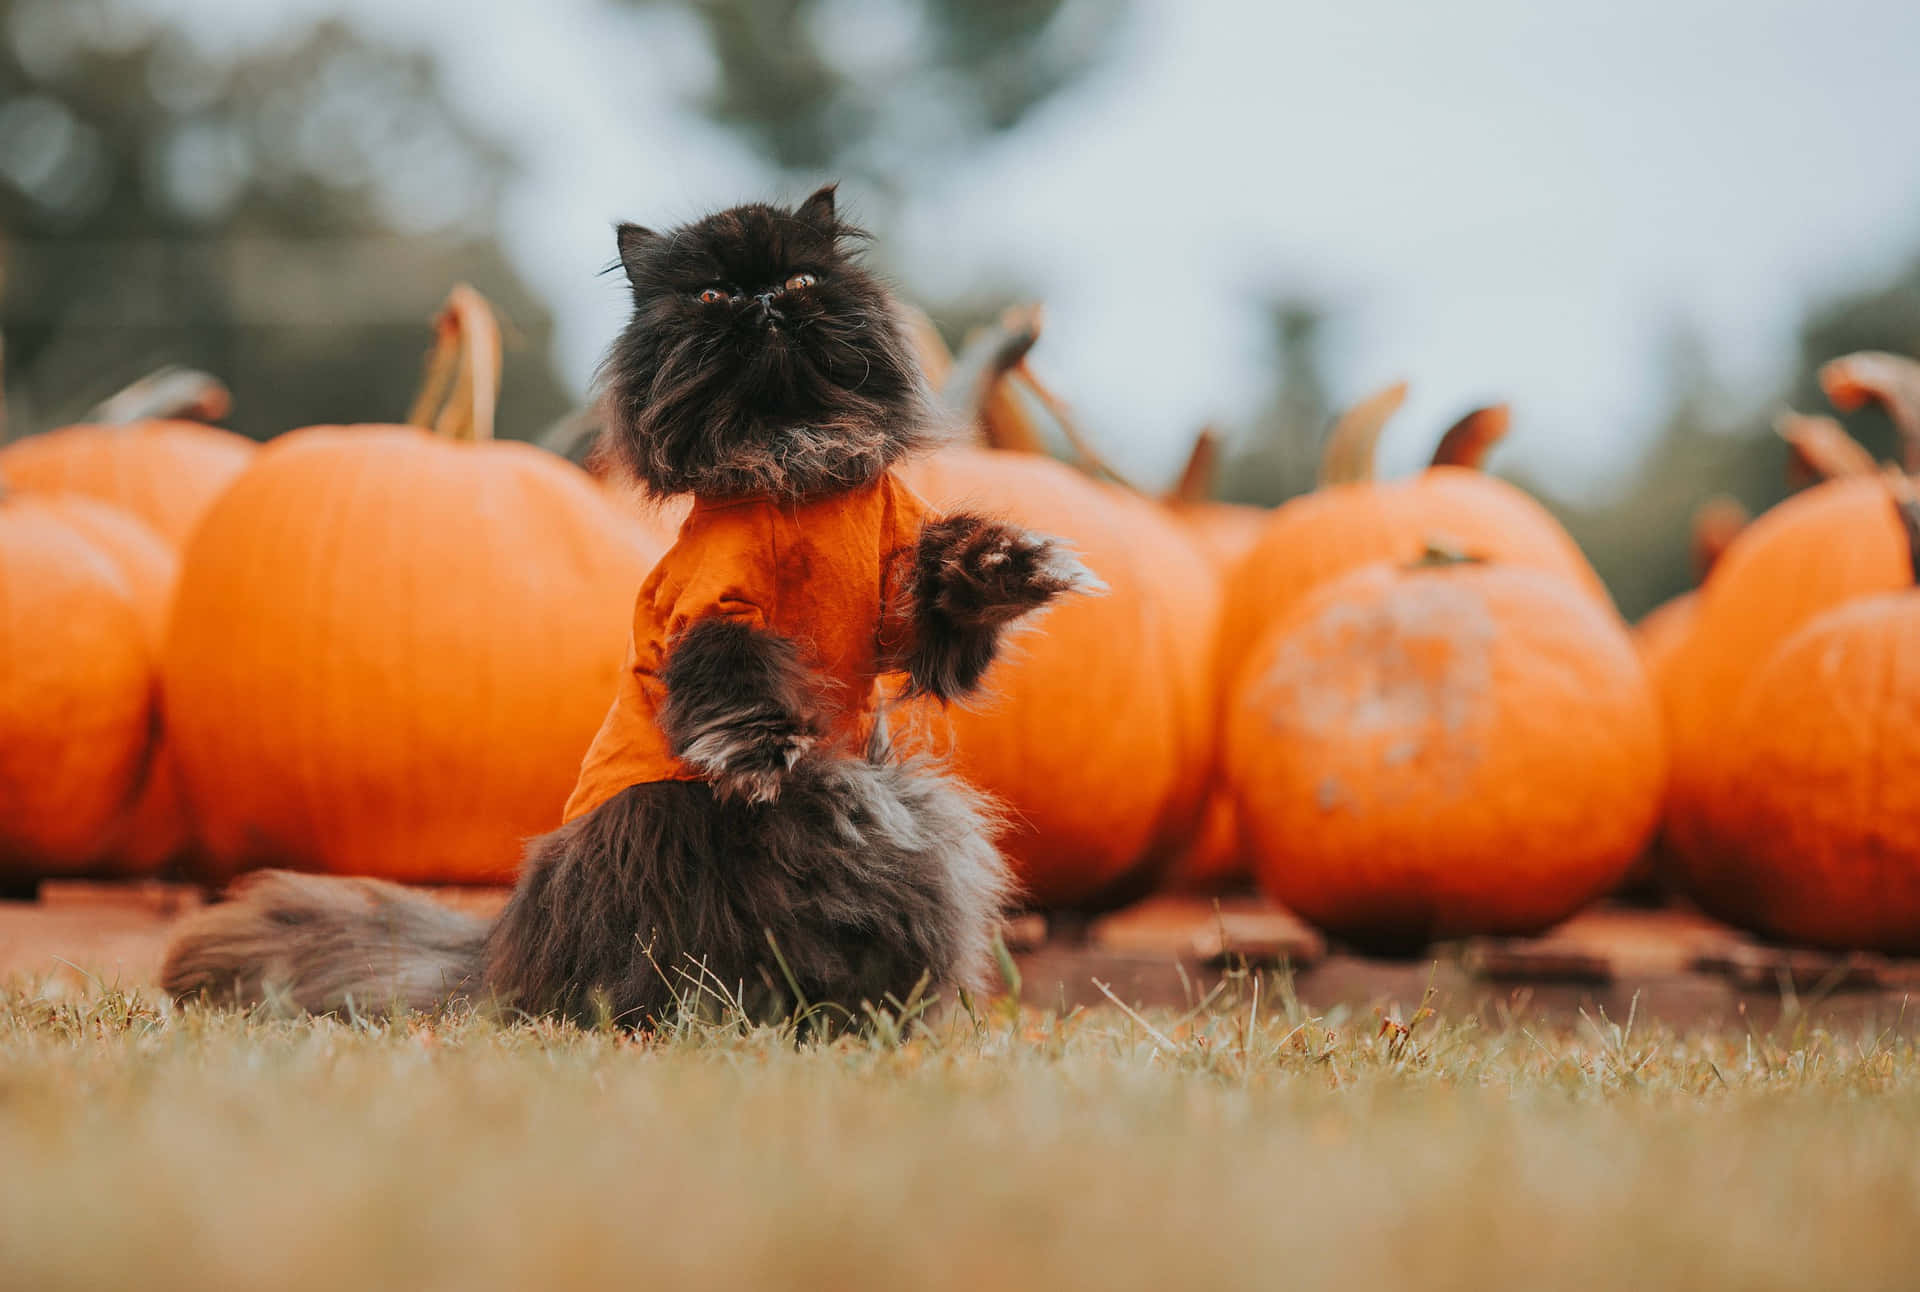 Pumpkin Patch Picture Of Funny Cat